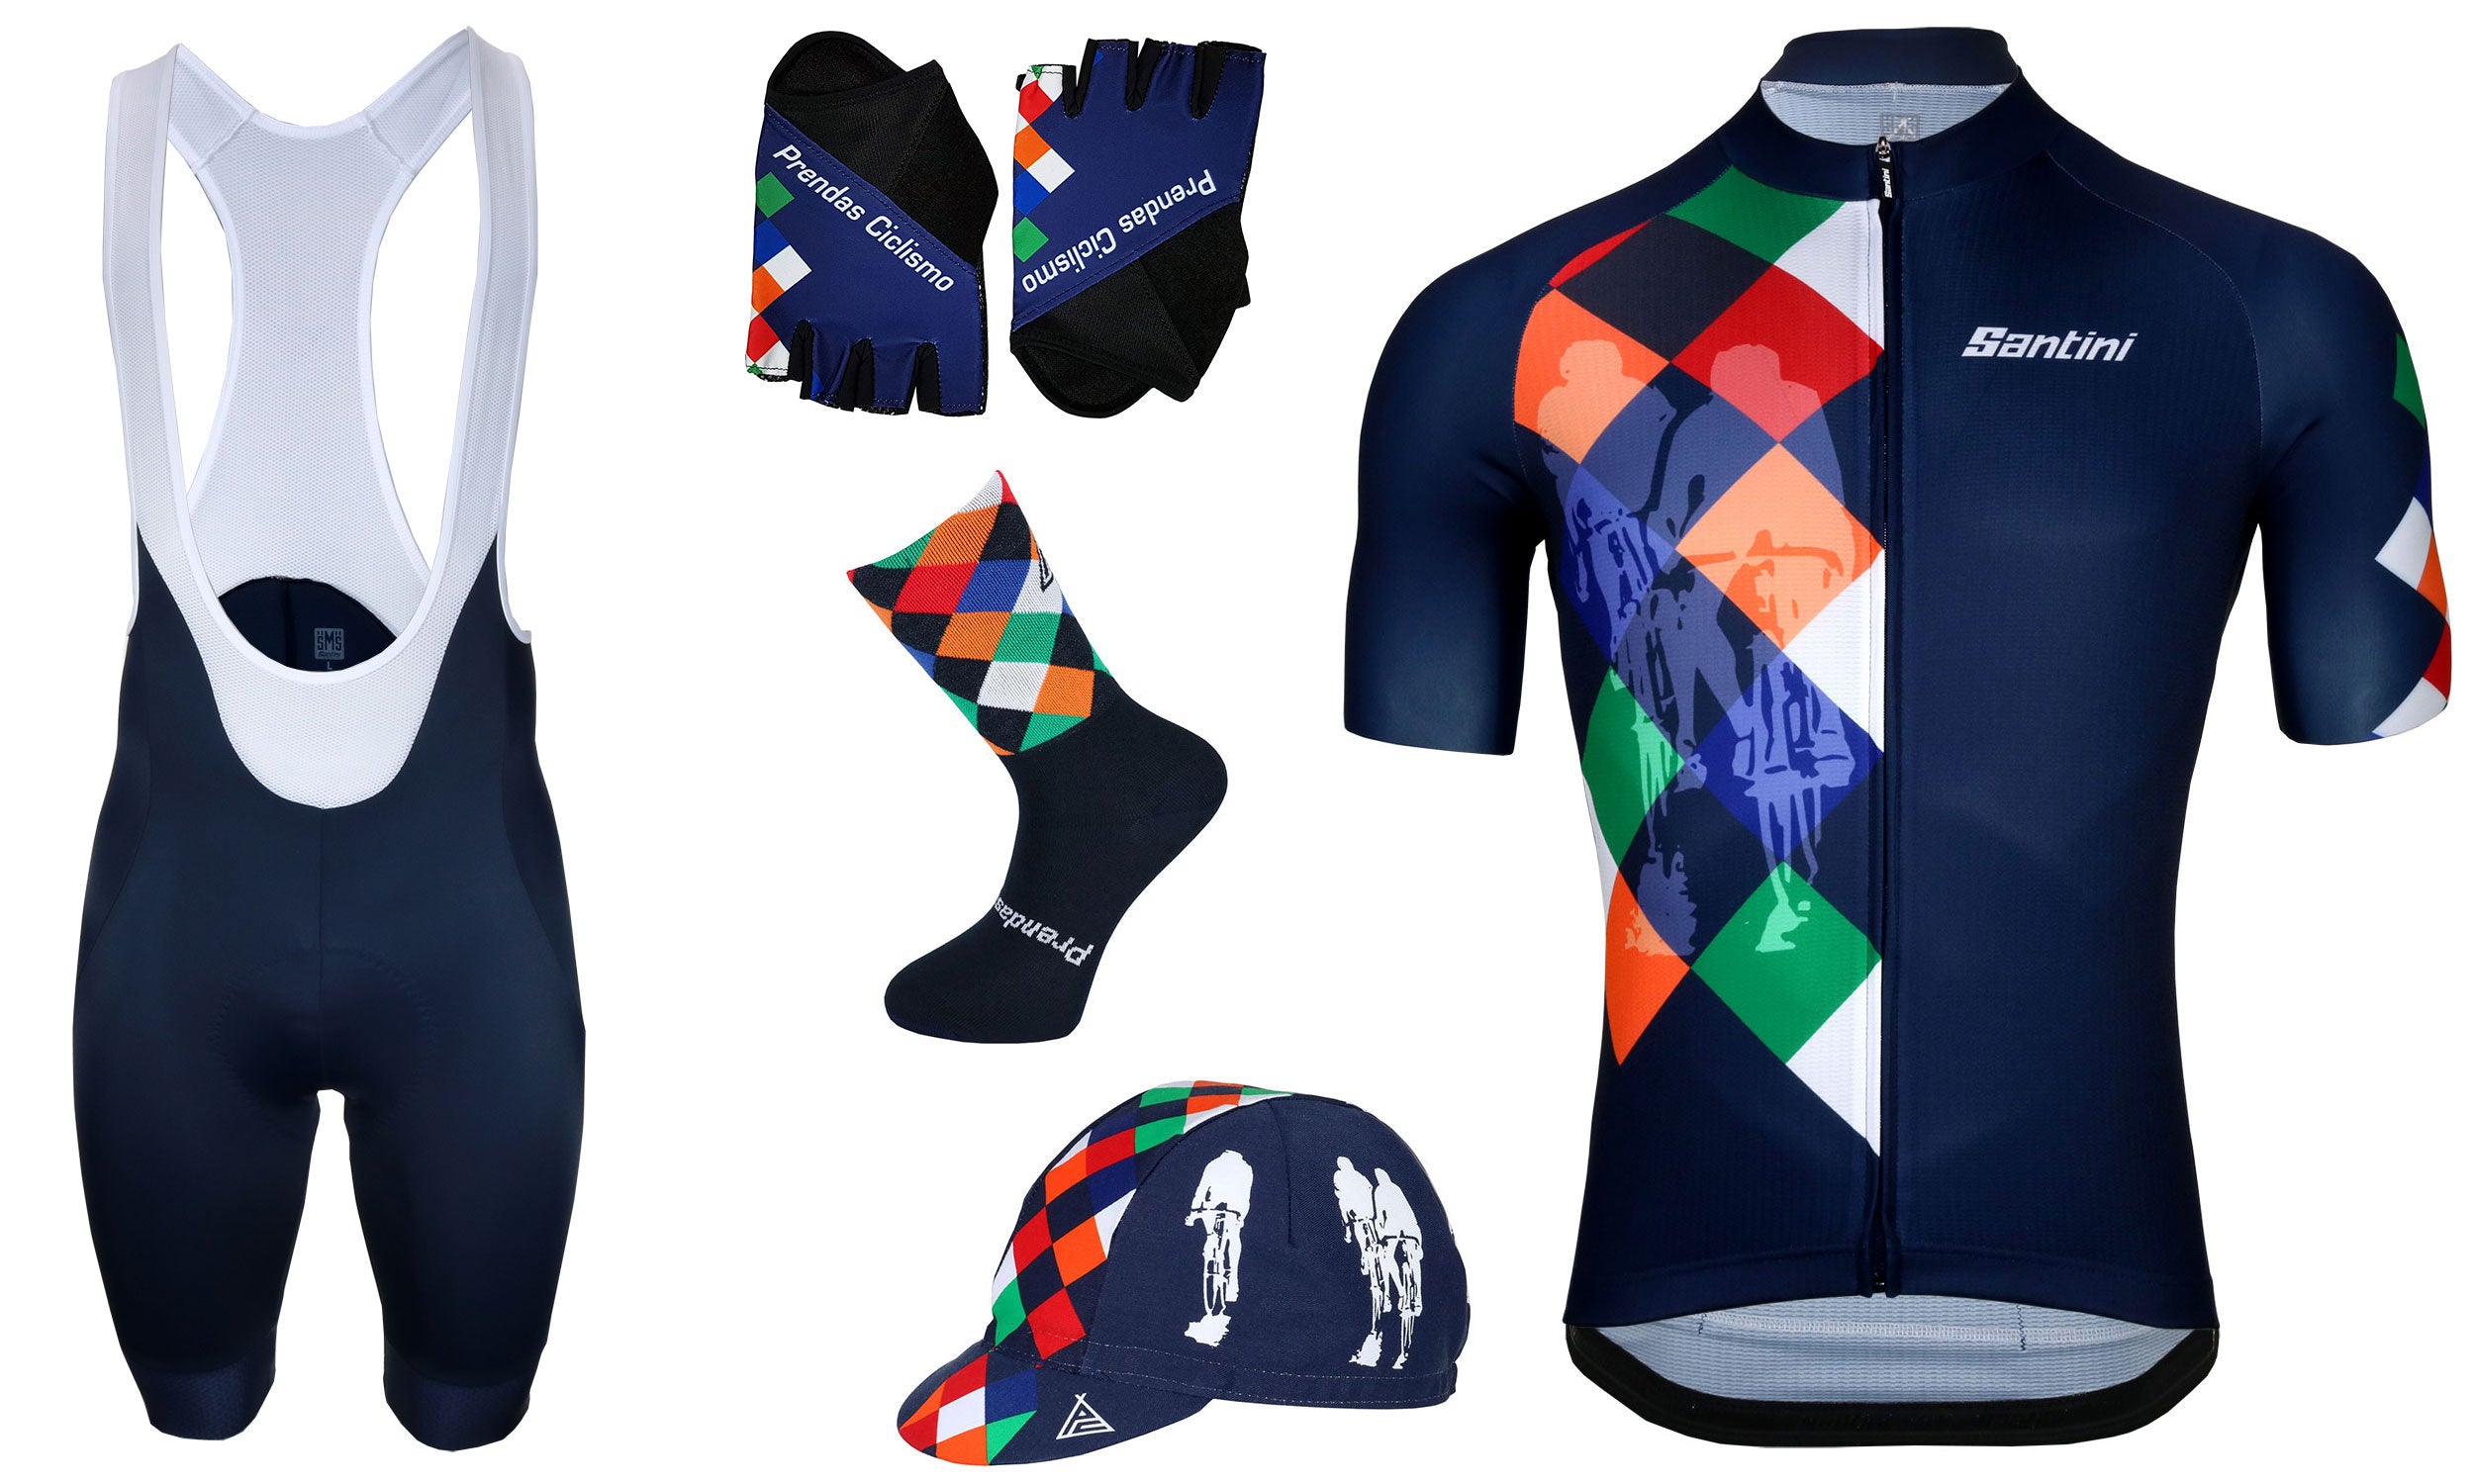 You can buy the exclusive Chambéry 1989 collection at Prendas Ciclismo.